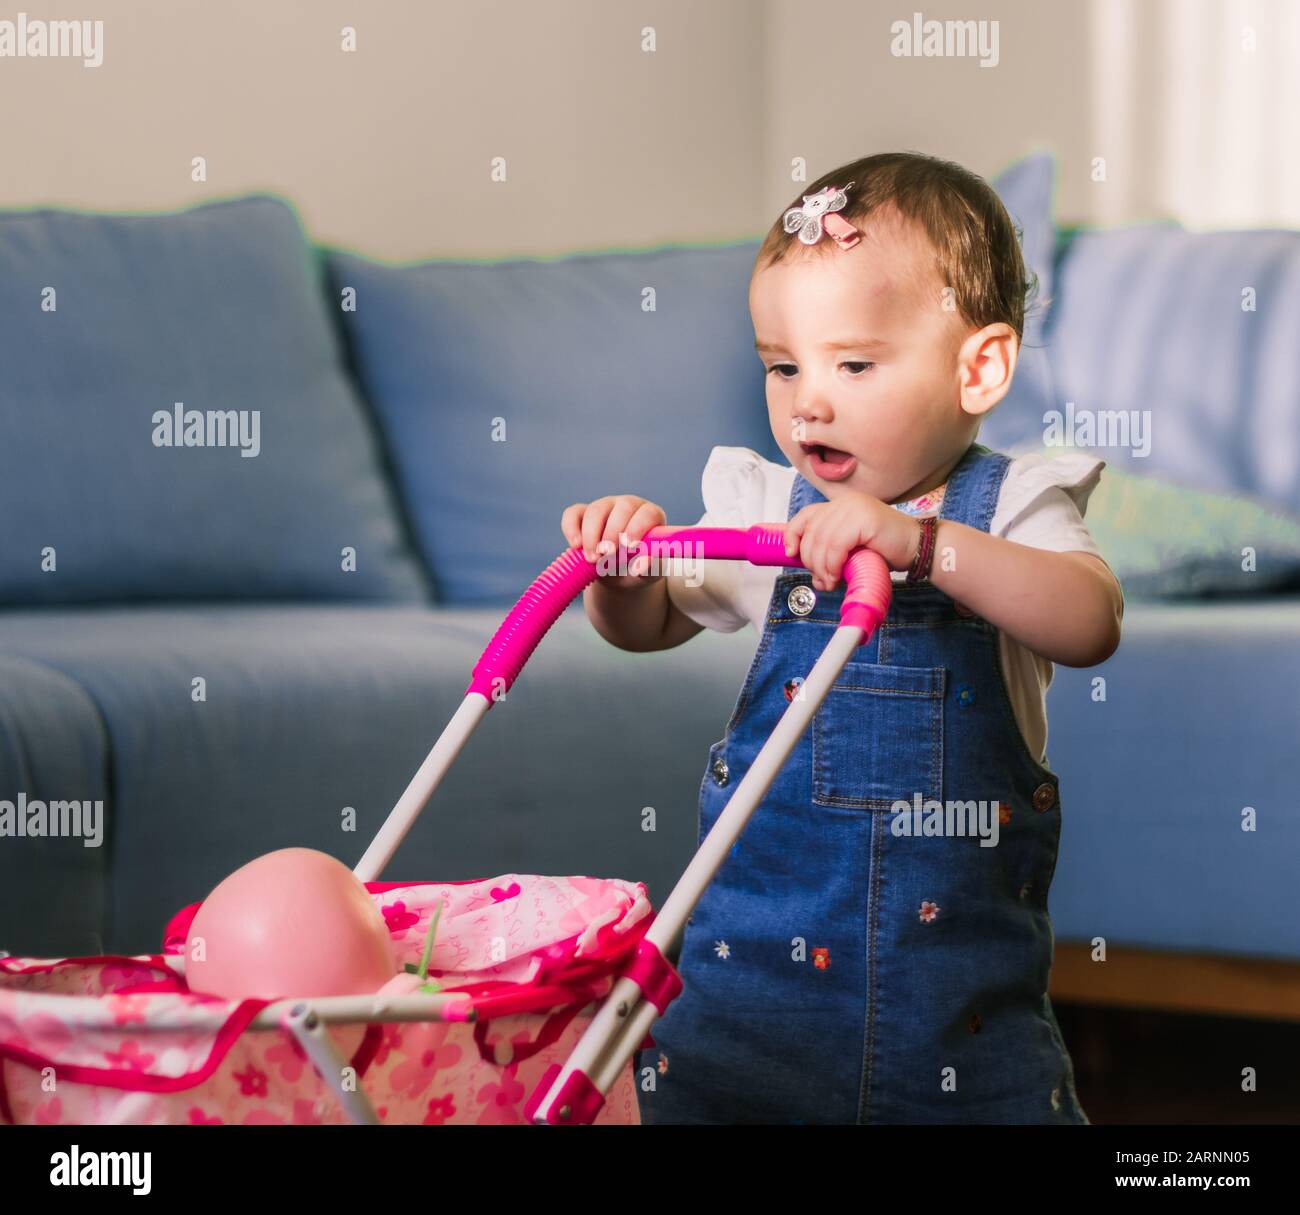 portrait of a cute little baby girl playing mothers and daughters with her pink doll in the buggy. Stock Photo